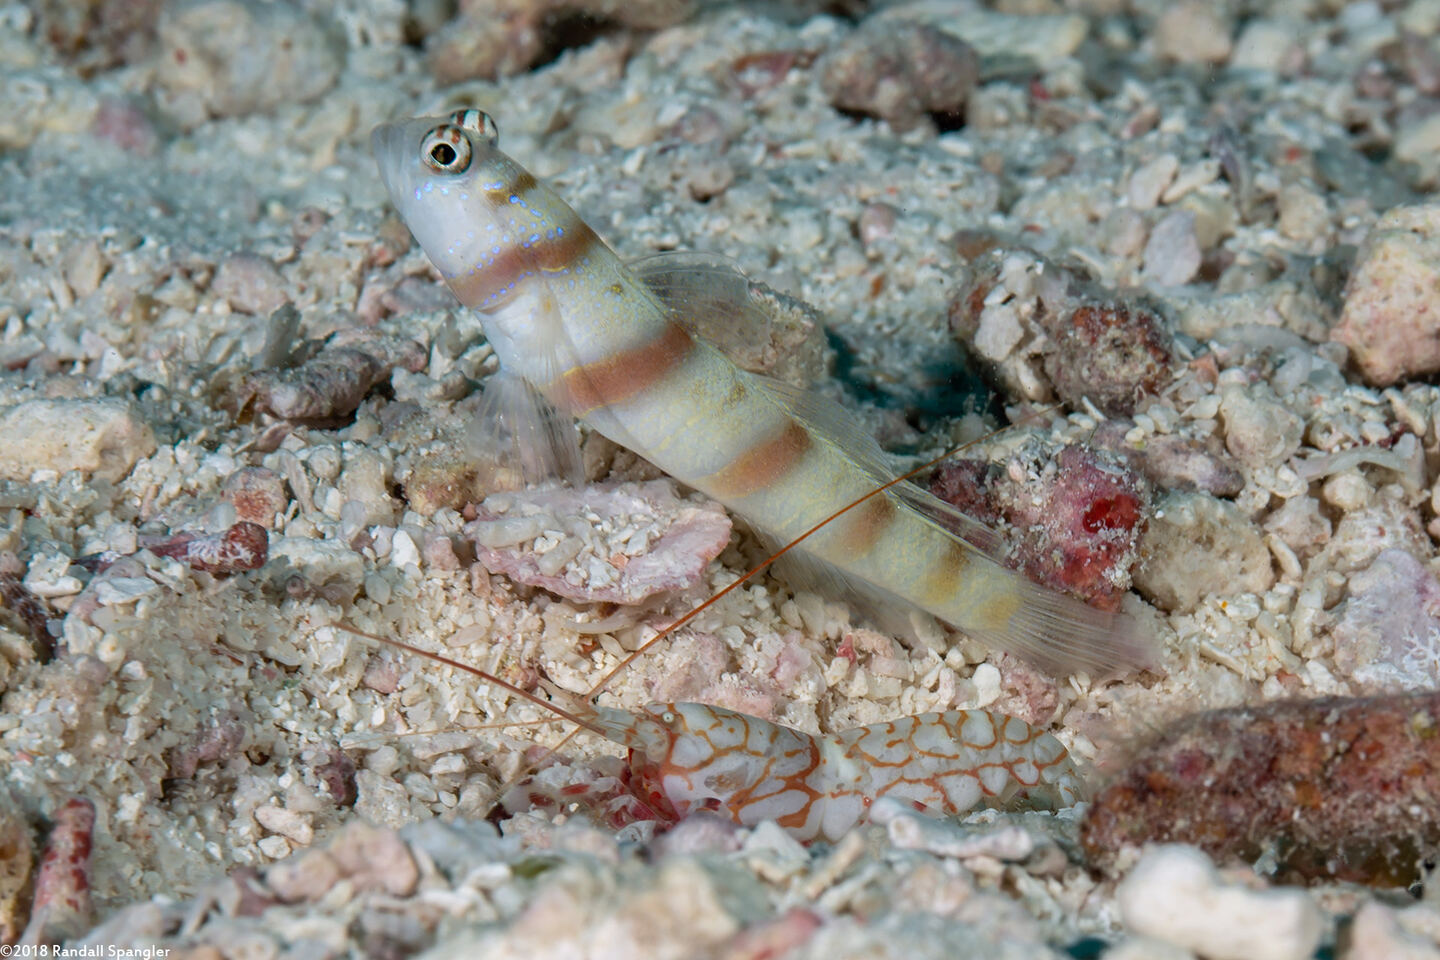 Alpheus bellulus (Tiger Snapping Shrimp); Shrimp and goby